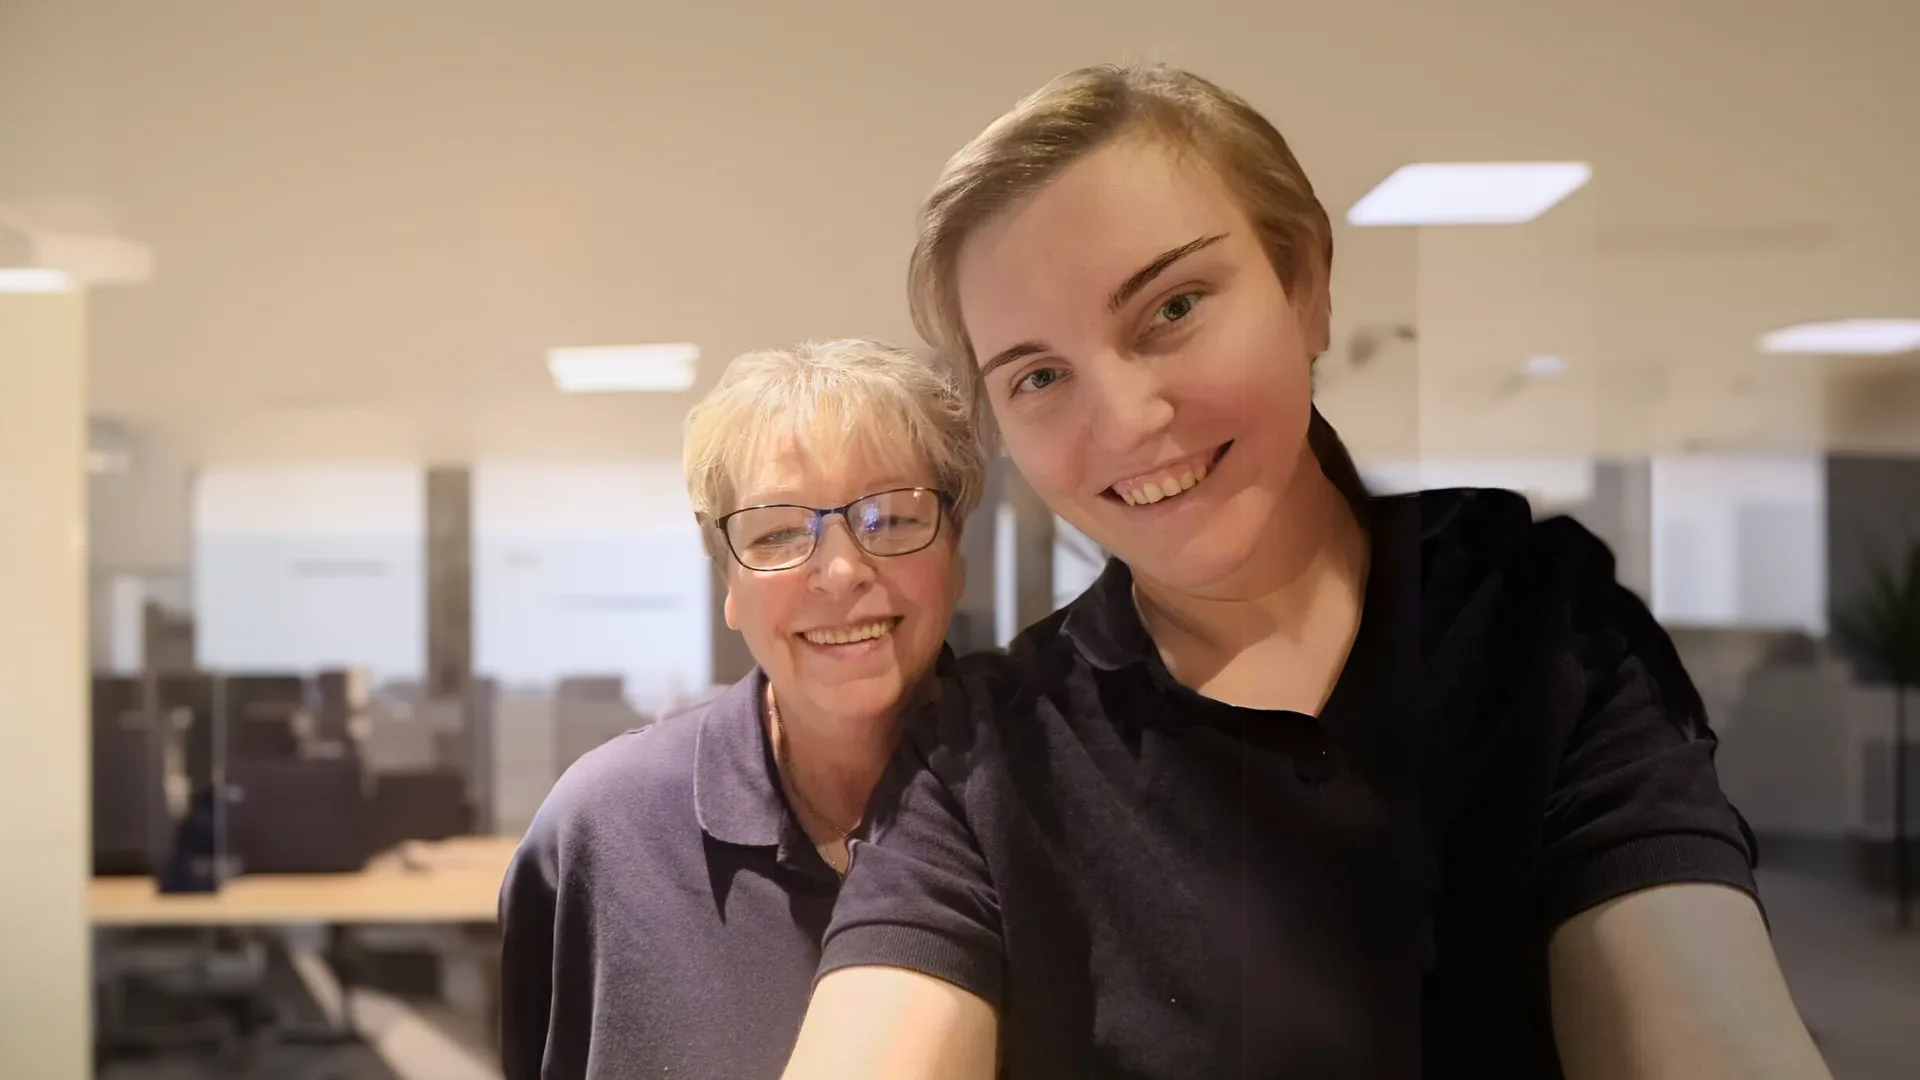 Two smiling people taking a selfie in the office.